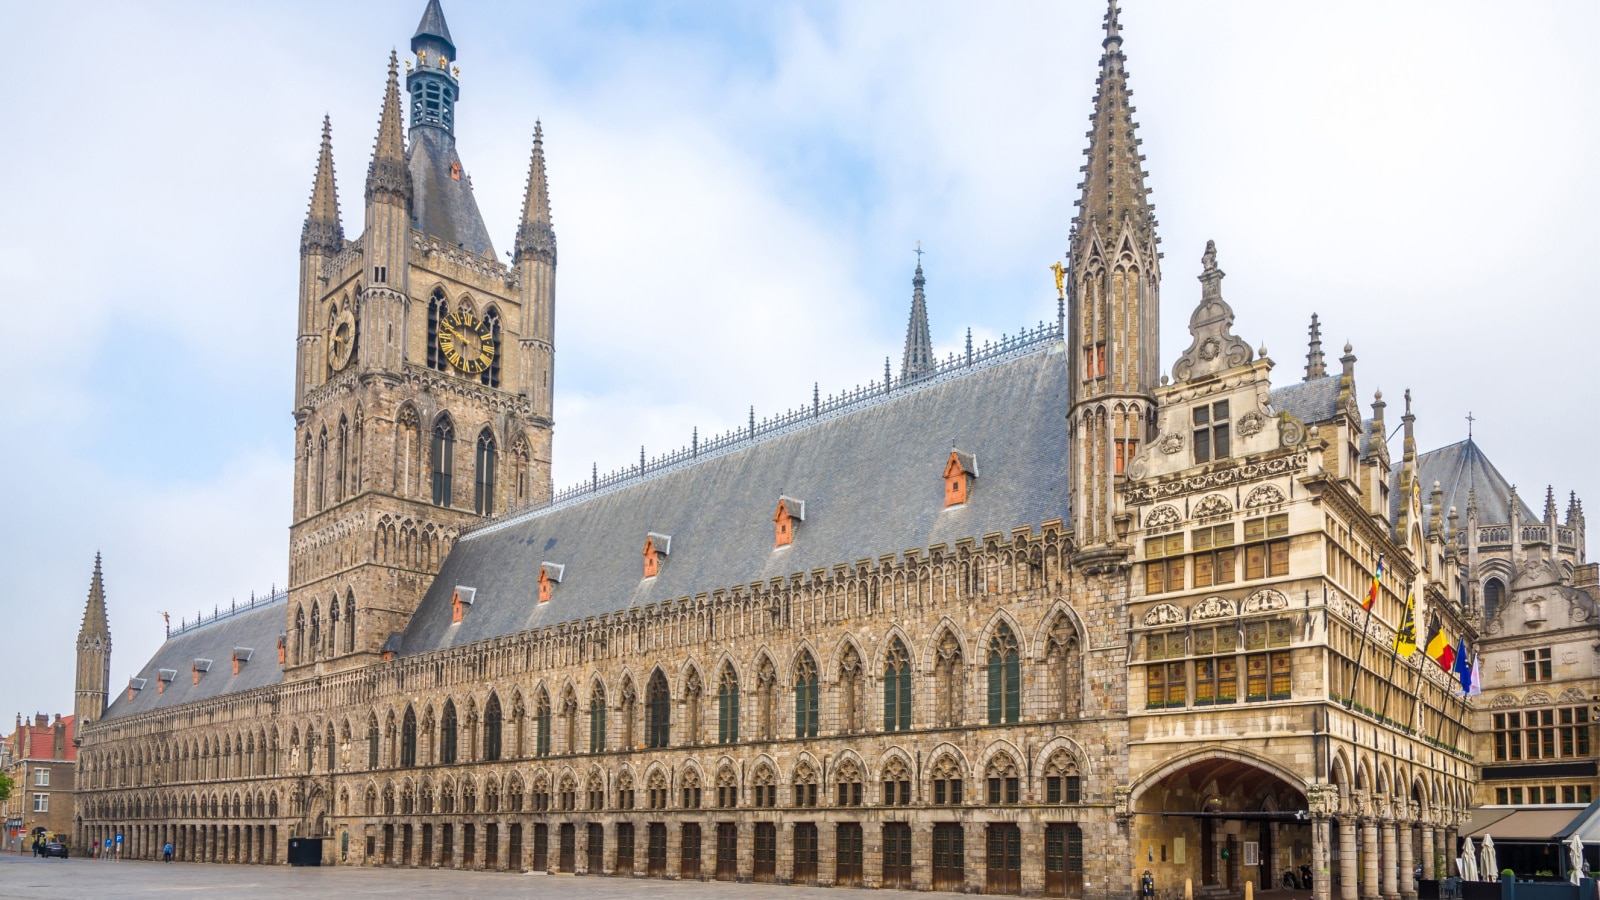 View at the Cloth hall and City hall at the Grote markt of Ypres - Belgium